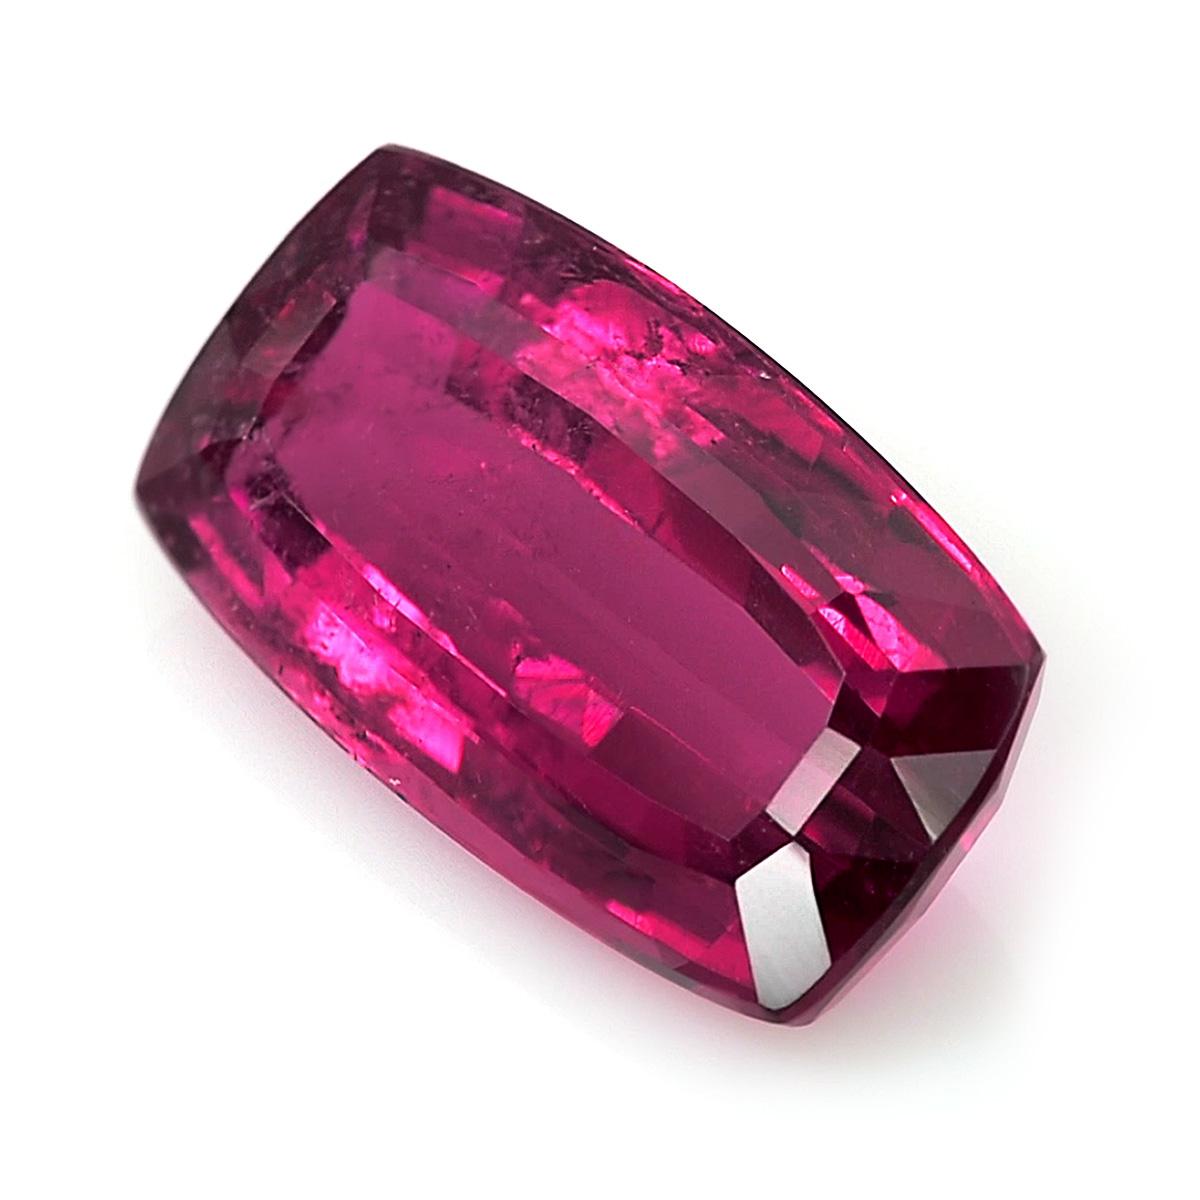 Identification: Natural Rubellite 5.60 carats

Carat: 5.60 carats
Shape: Radiant
Measurements: 15 x 8.4 x 5.12 mm 
Cut: Brilliant/Step
Color: Pink
Clarity: very eye clean

Presenting a striking Natural Rubellite, weighing 5.60 carats and skillfully